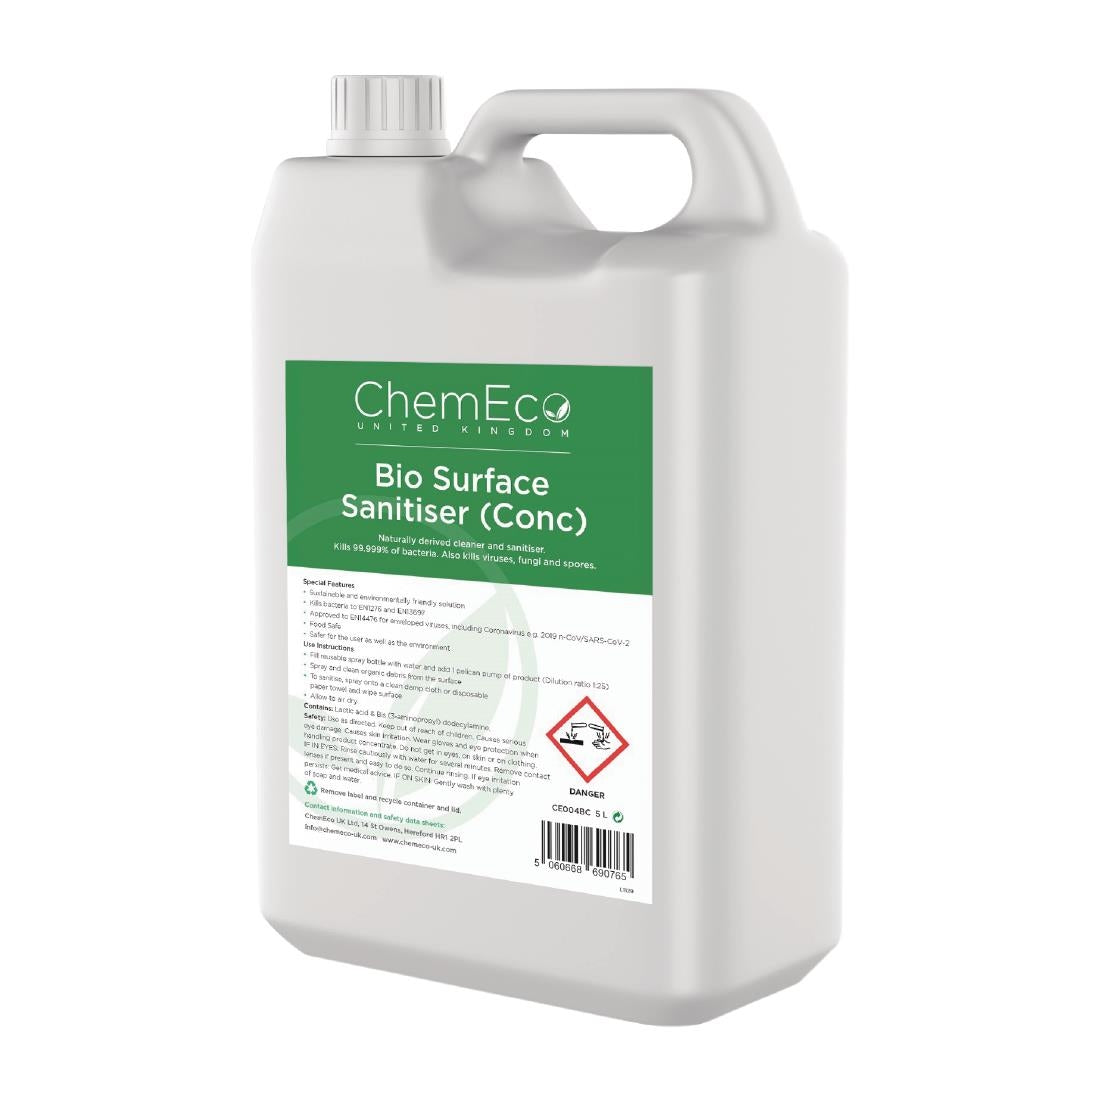 CX952 ChemEco Bio Surface Sanitiser Concentrate 5Ltr JD Catering Equipment Solutions Ltd